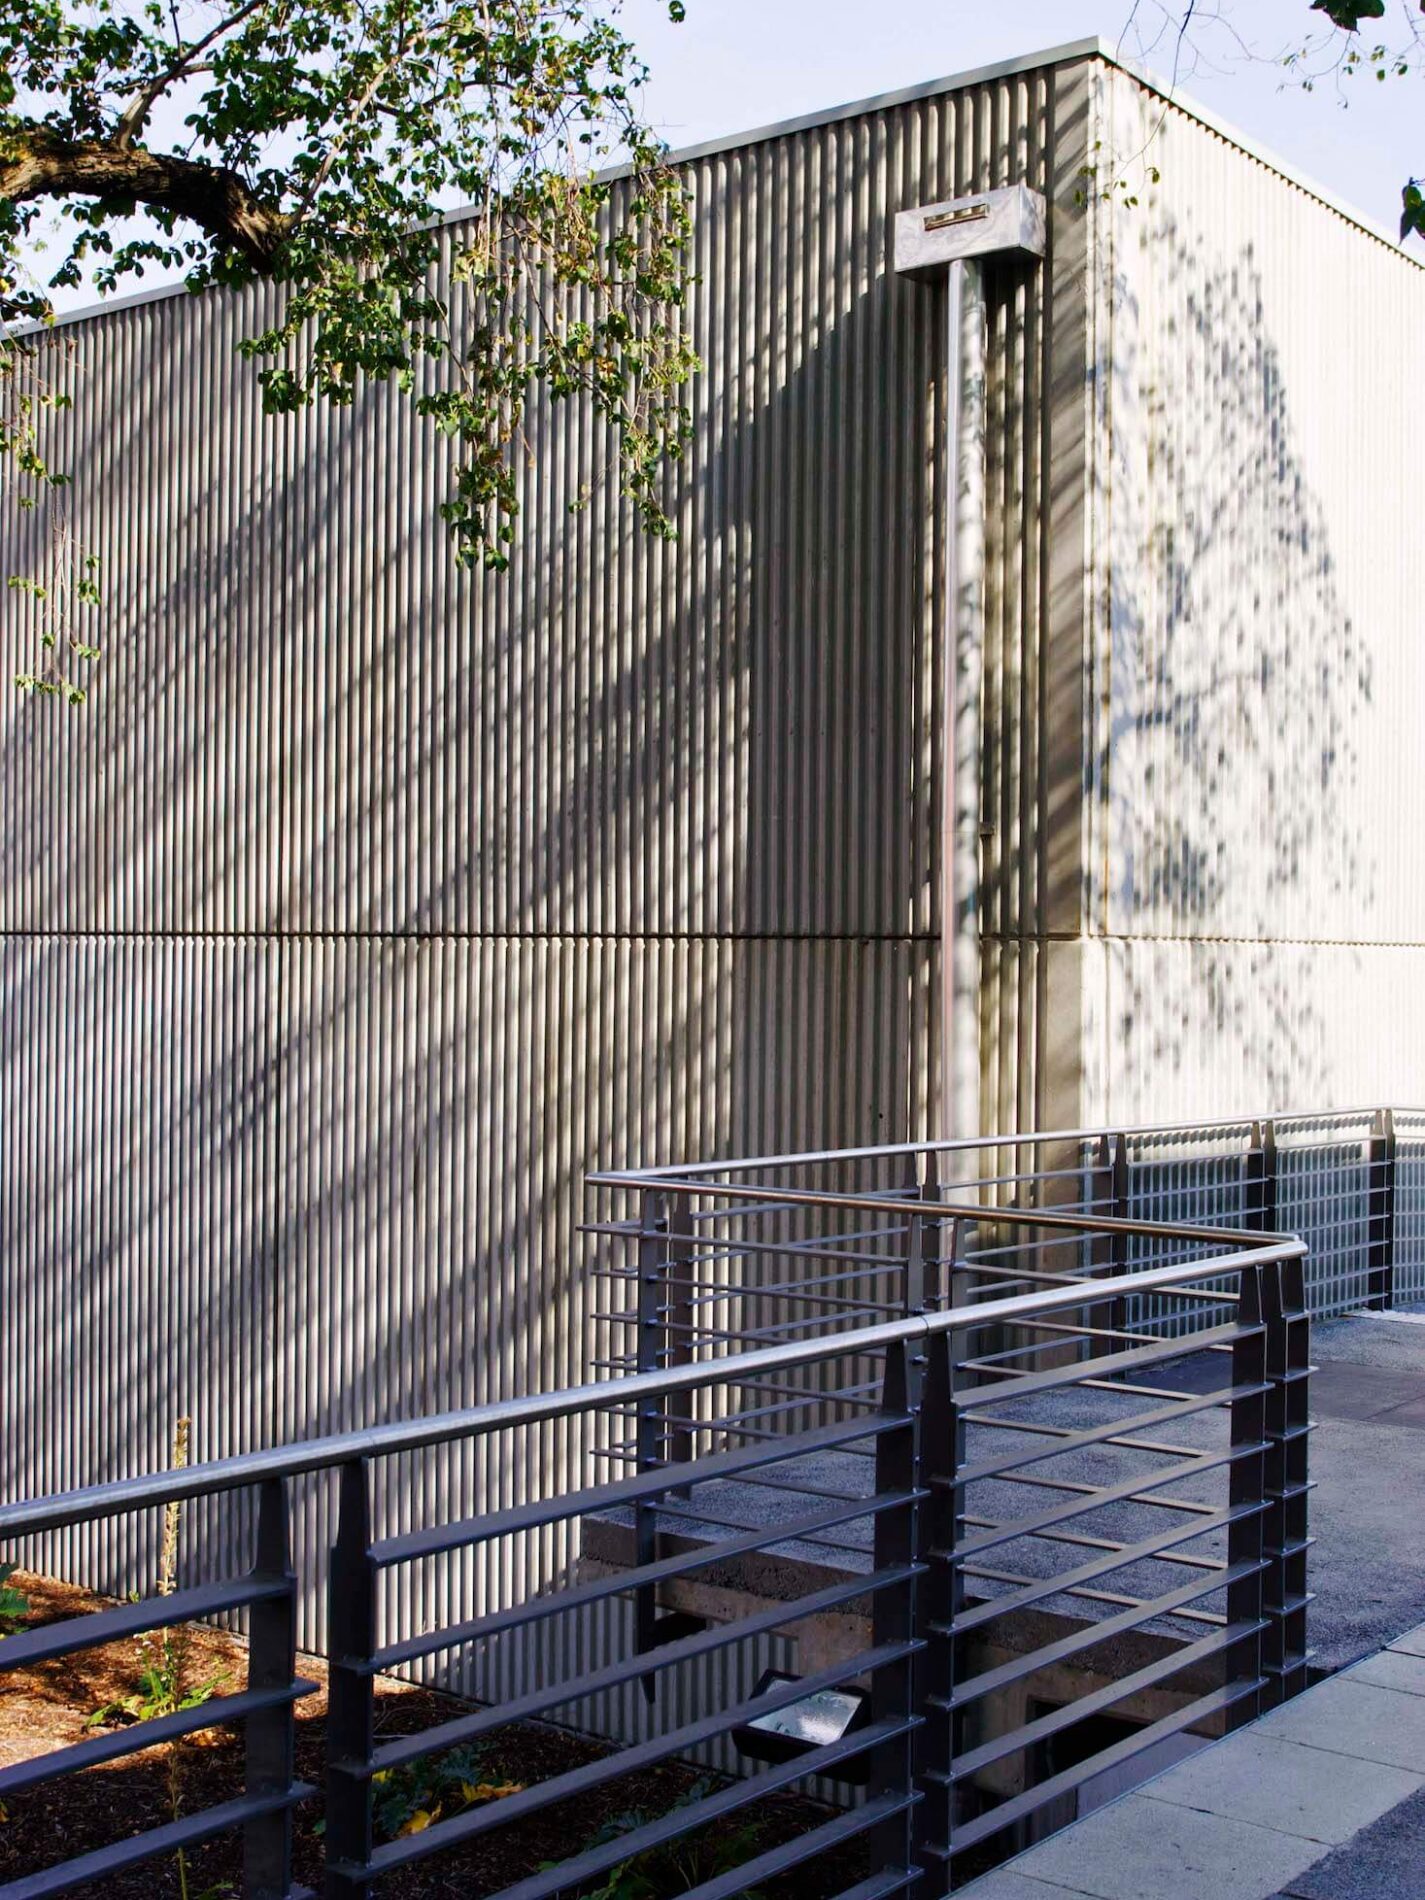 Metal cladding building and timber walkway with balustrade, in dappled shade